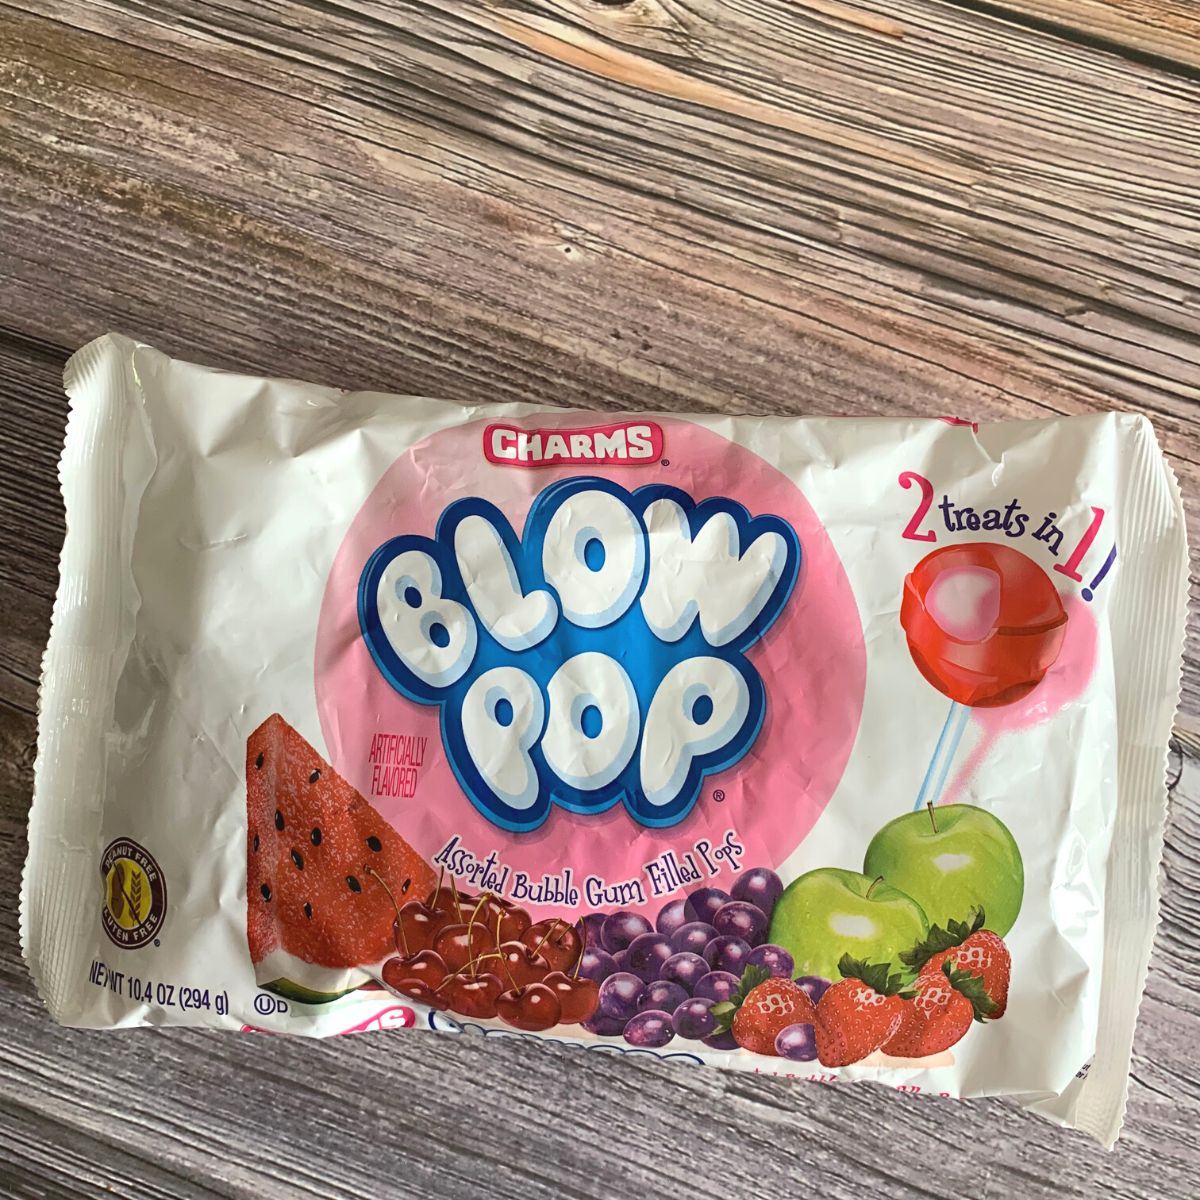 A bag of blow pops on a wooden table.